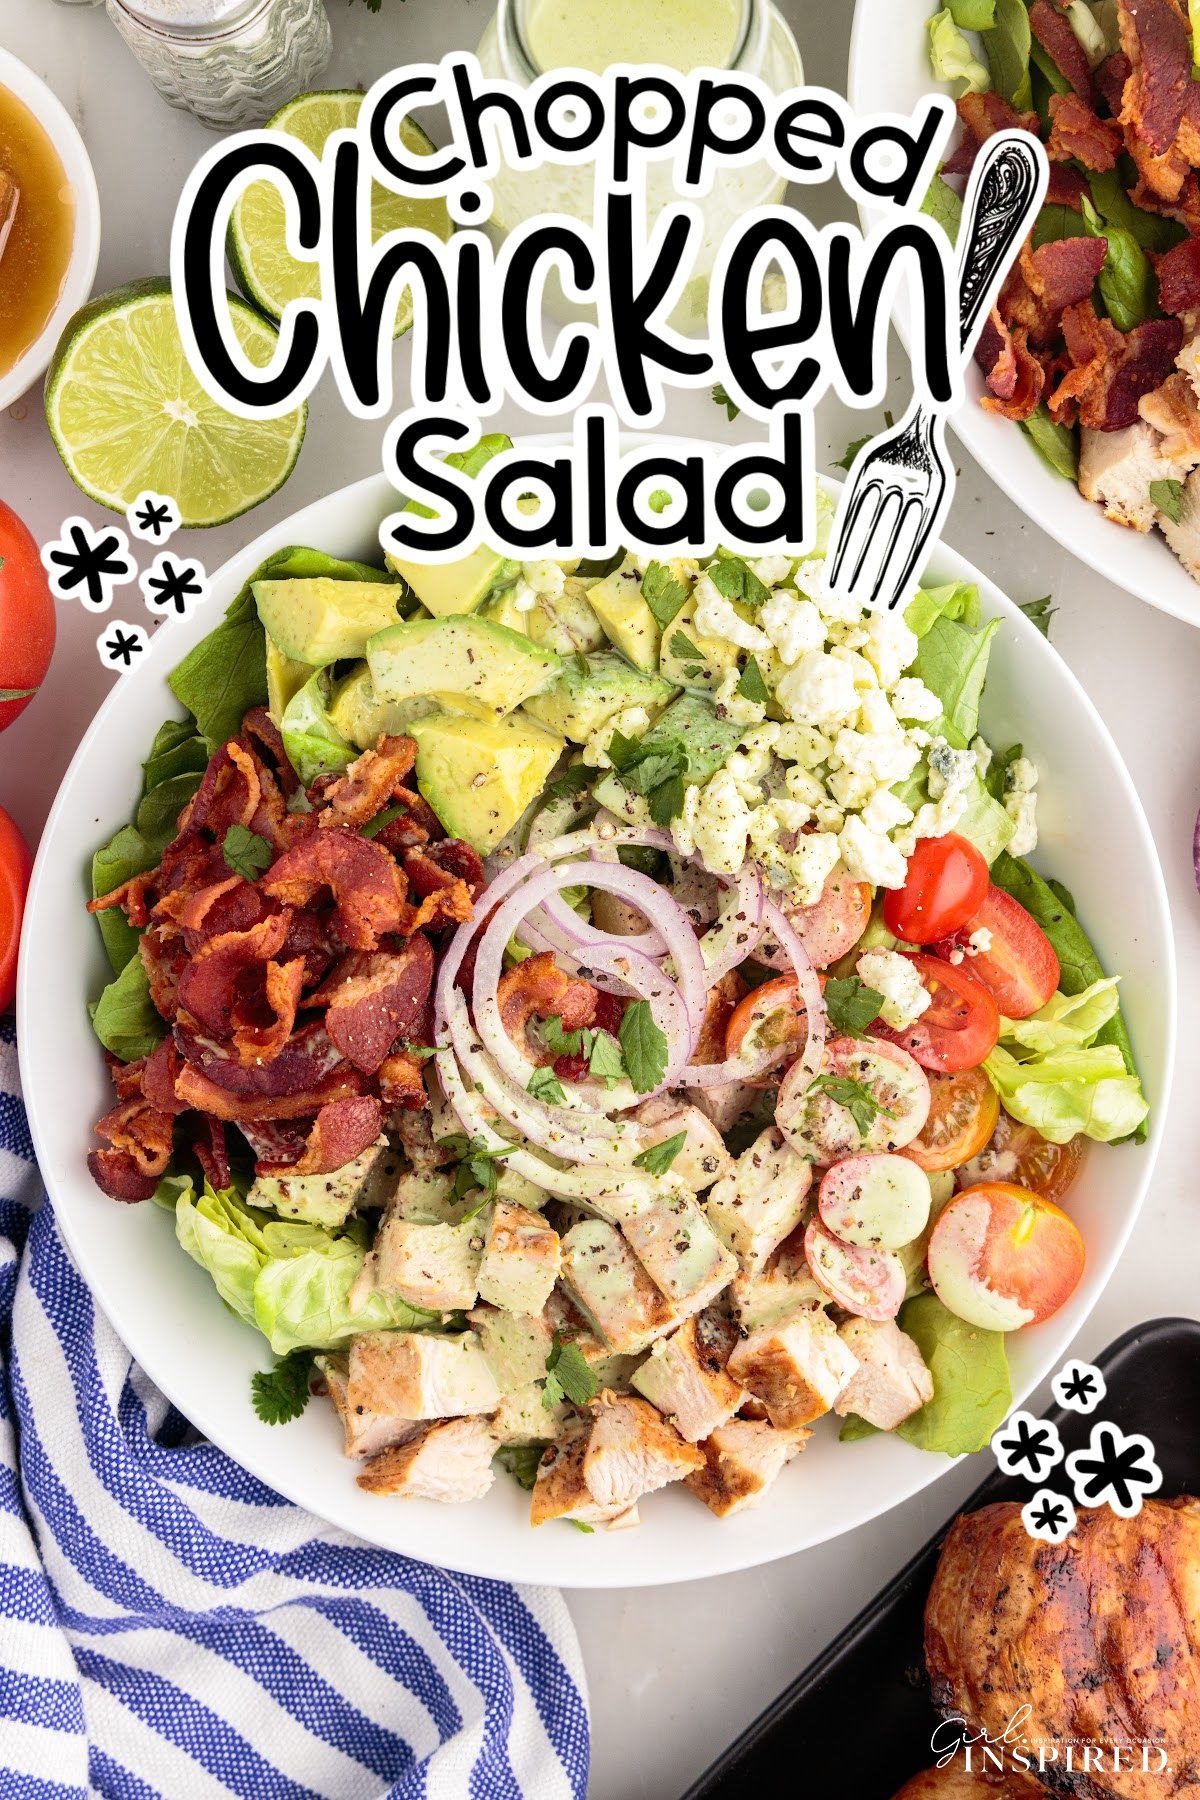 Chopped chicken salad with bacon, avocado, onions, tomatoes, and blue cheese tossed in dressing.